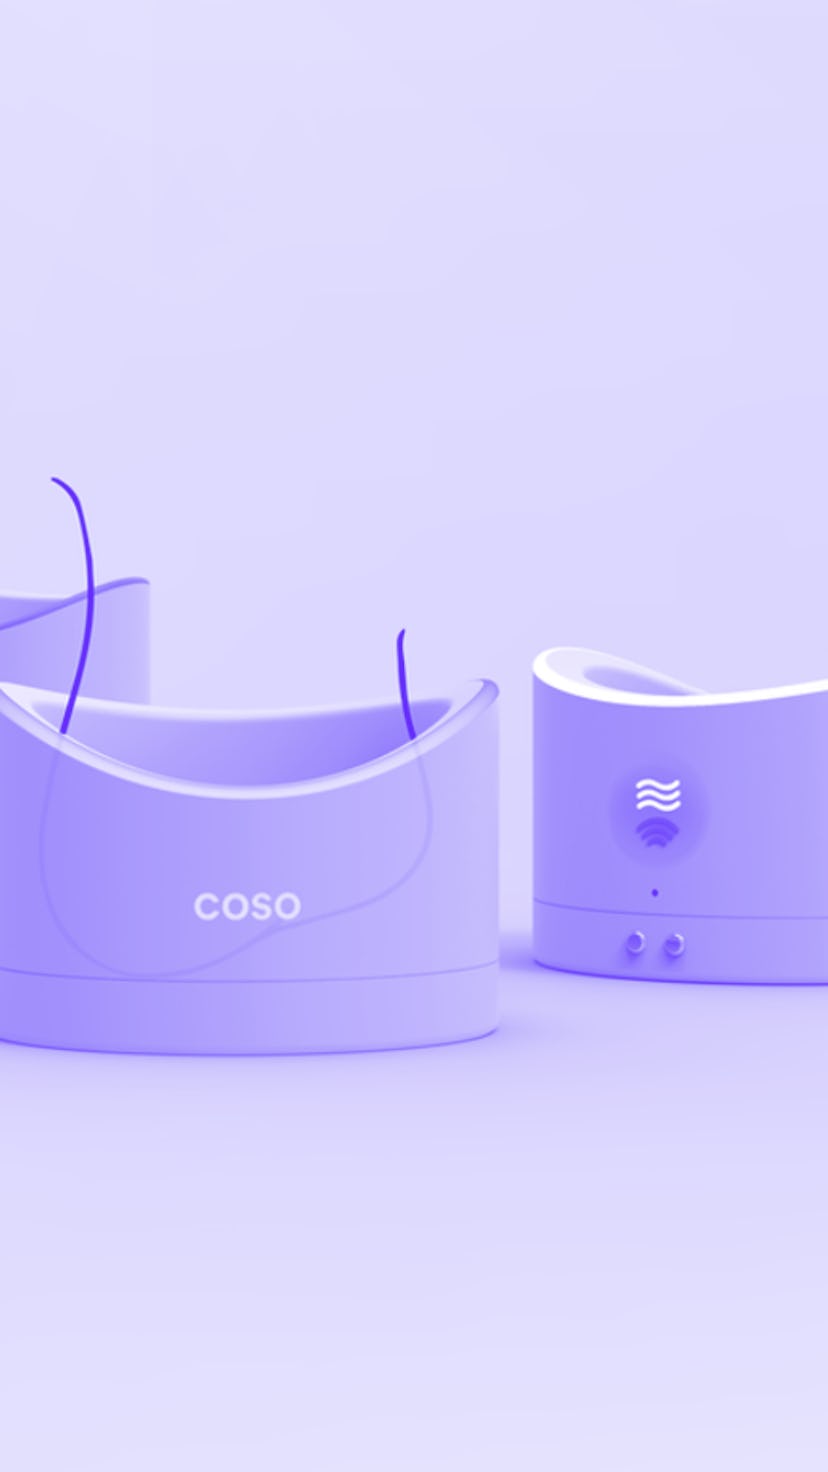 A concept contraceptive device called Coso that uses ultrasound waves to prevent sperm from regenera...